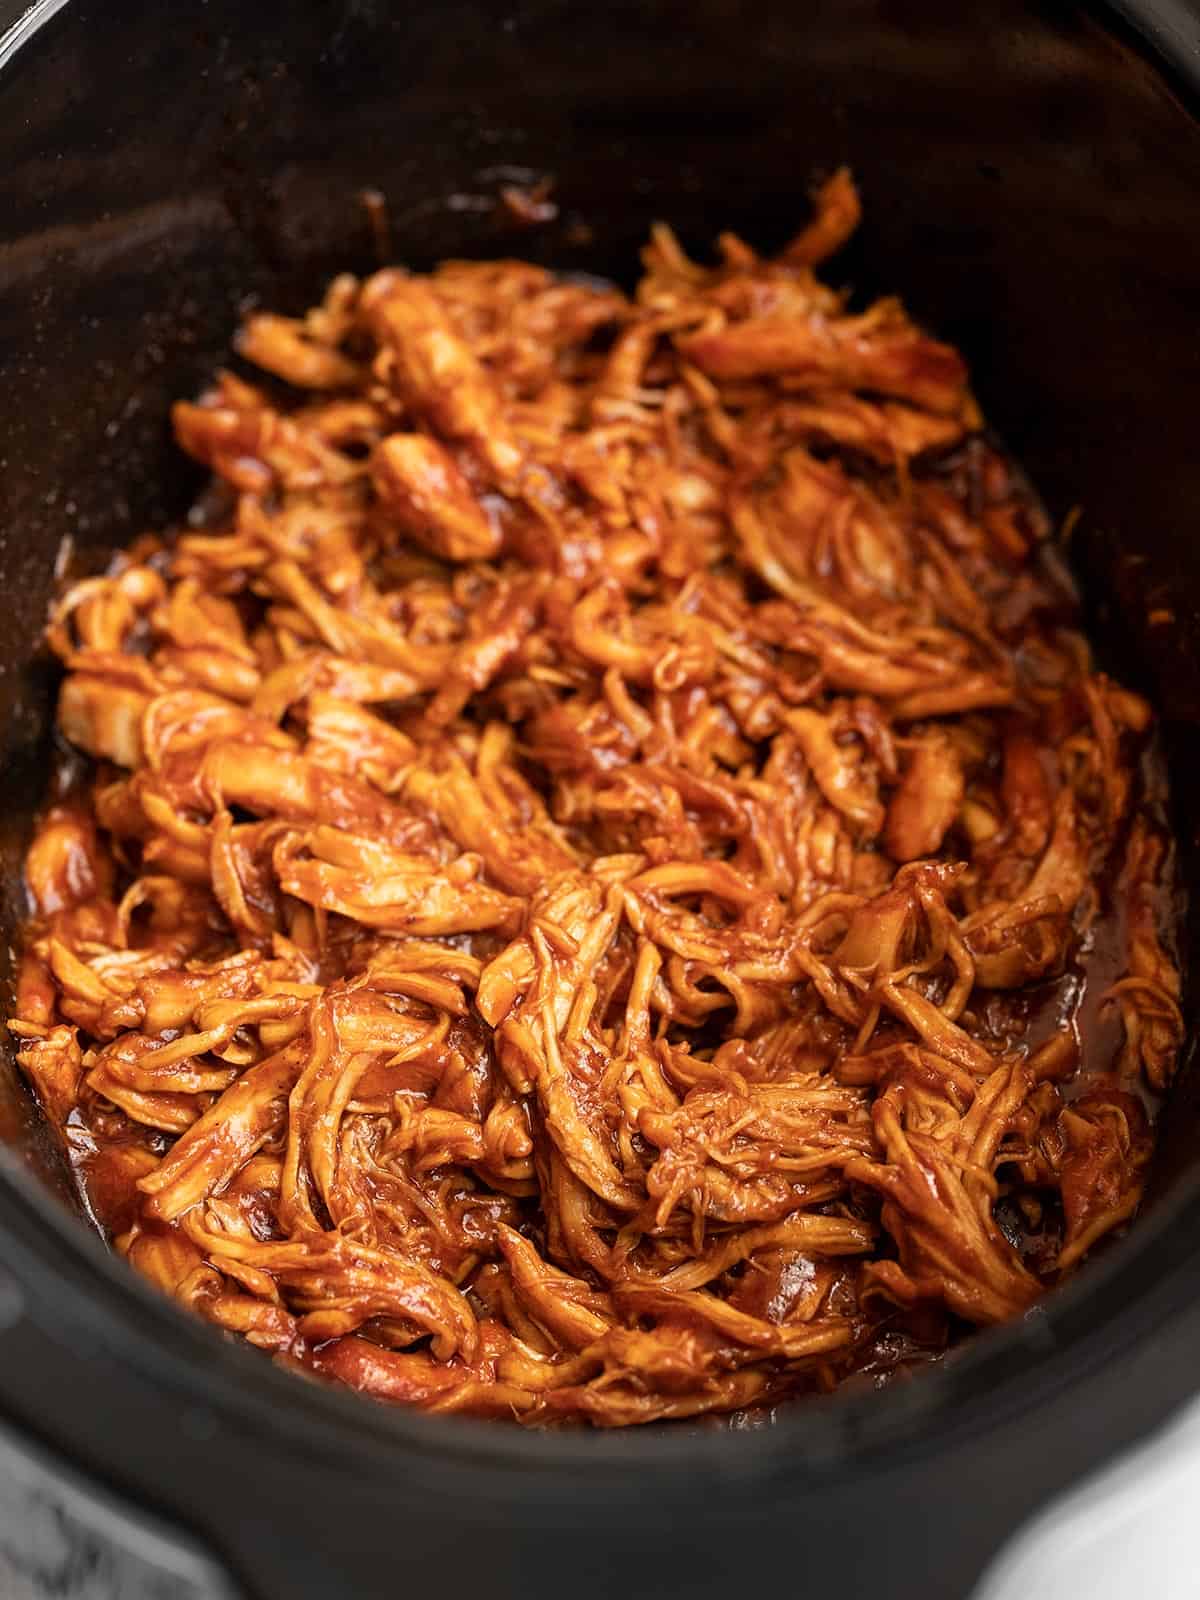 Side view of shredded bbq chicken in a slow cooker.